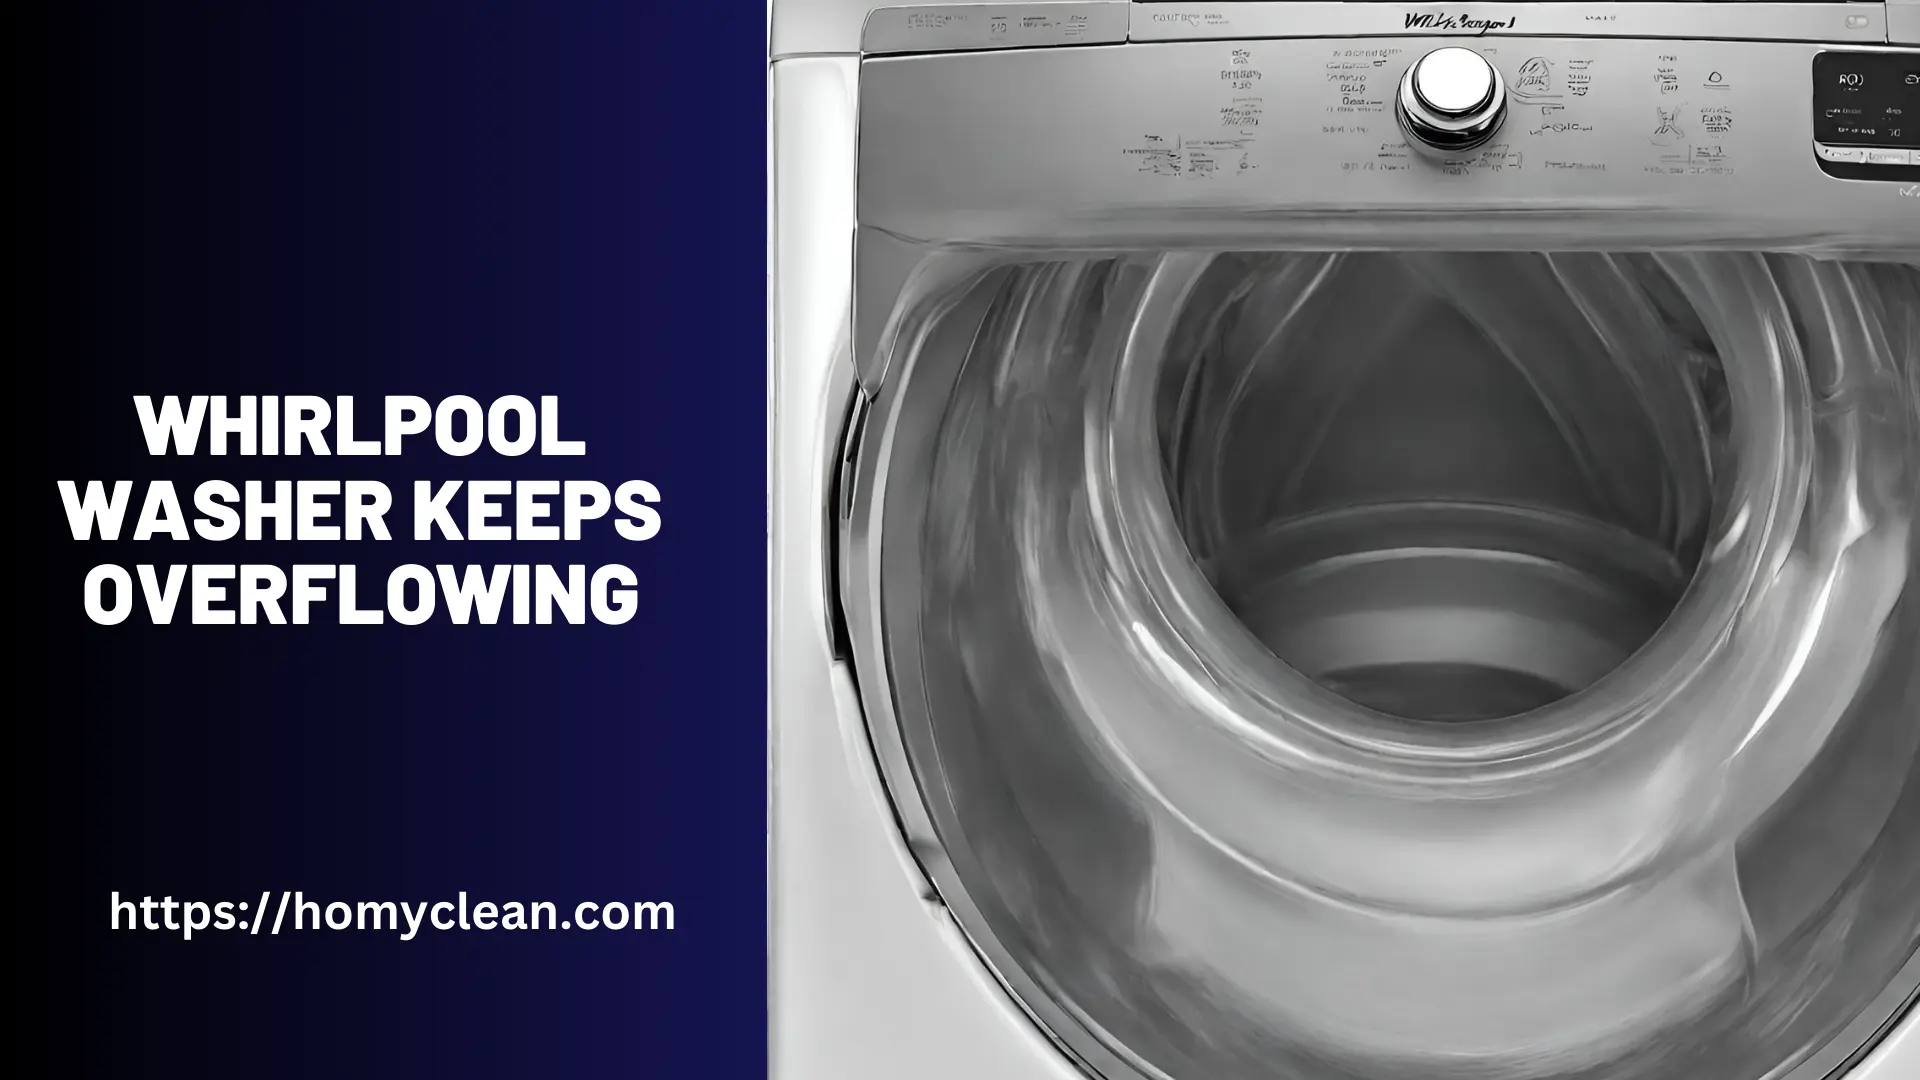 Whirlpool Washer Keeps Overflowing – Fixing the Issue